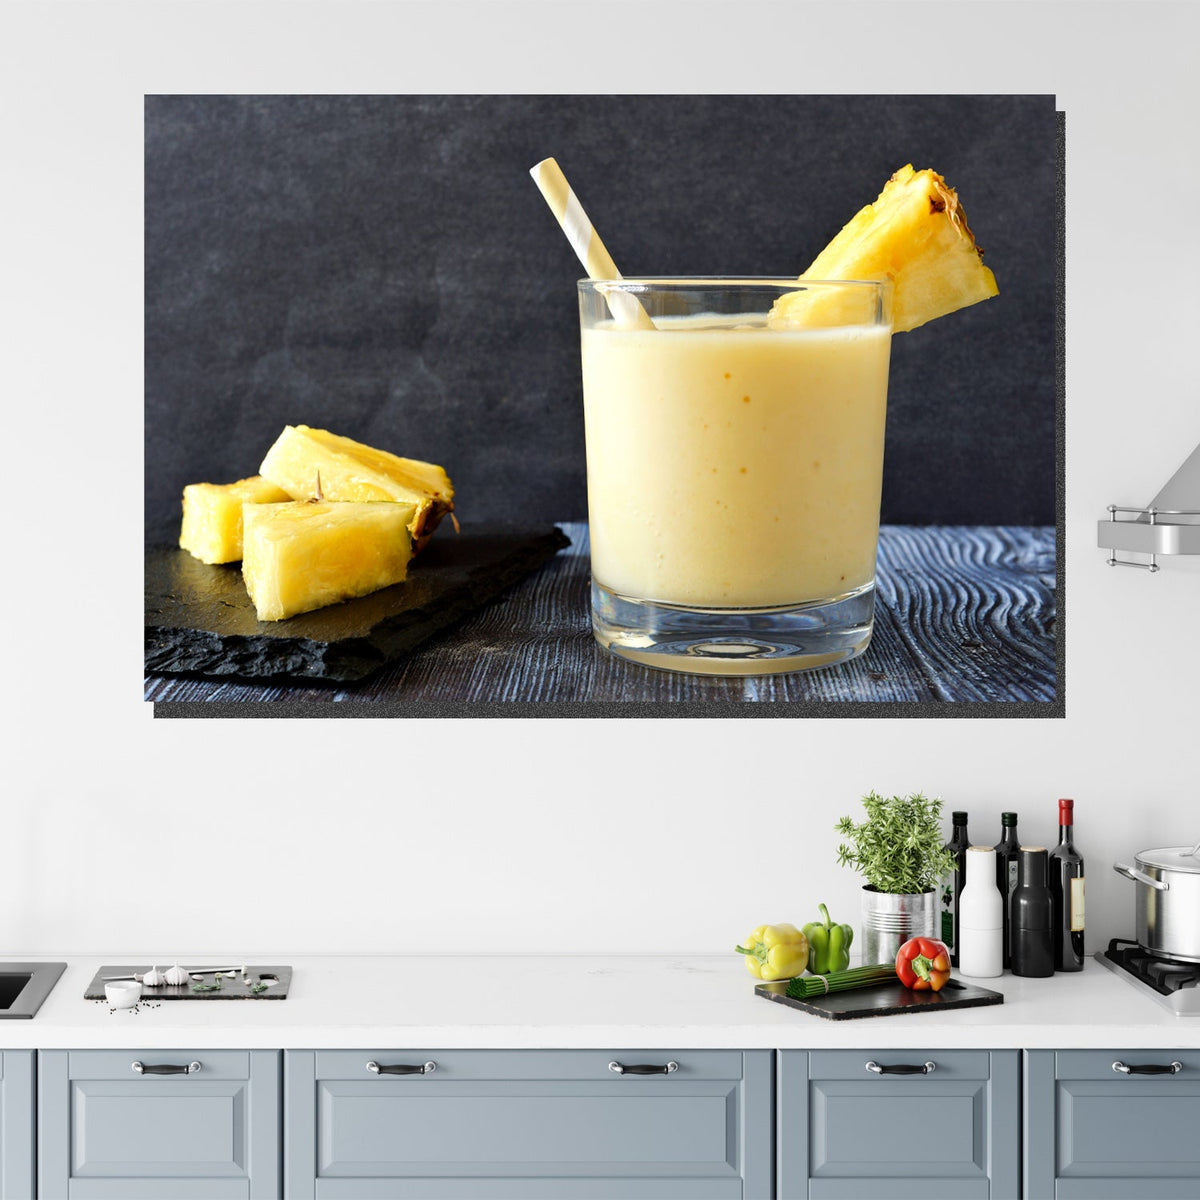 https://cdn.shopify.com/s/files/1/0387/9986/8044/products/PineappleJuiceCanvasArtprintStretched-4.jpg